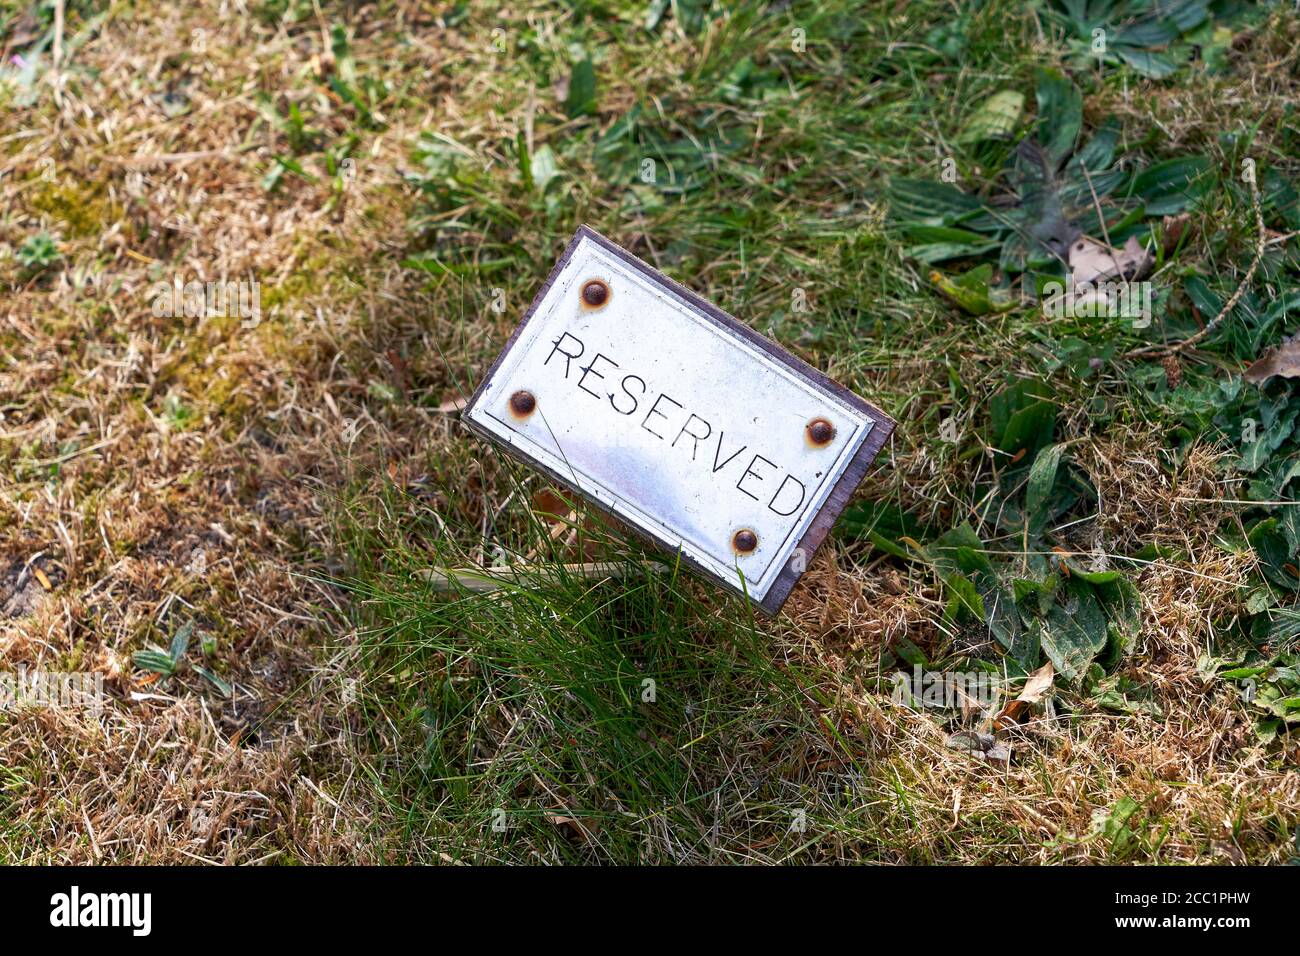 Patch of grass with small reserved sign Stock Photo